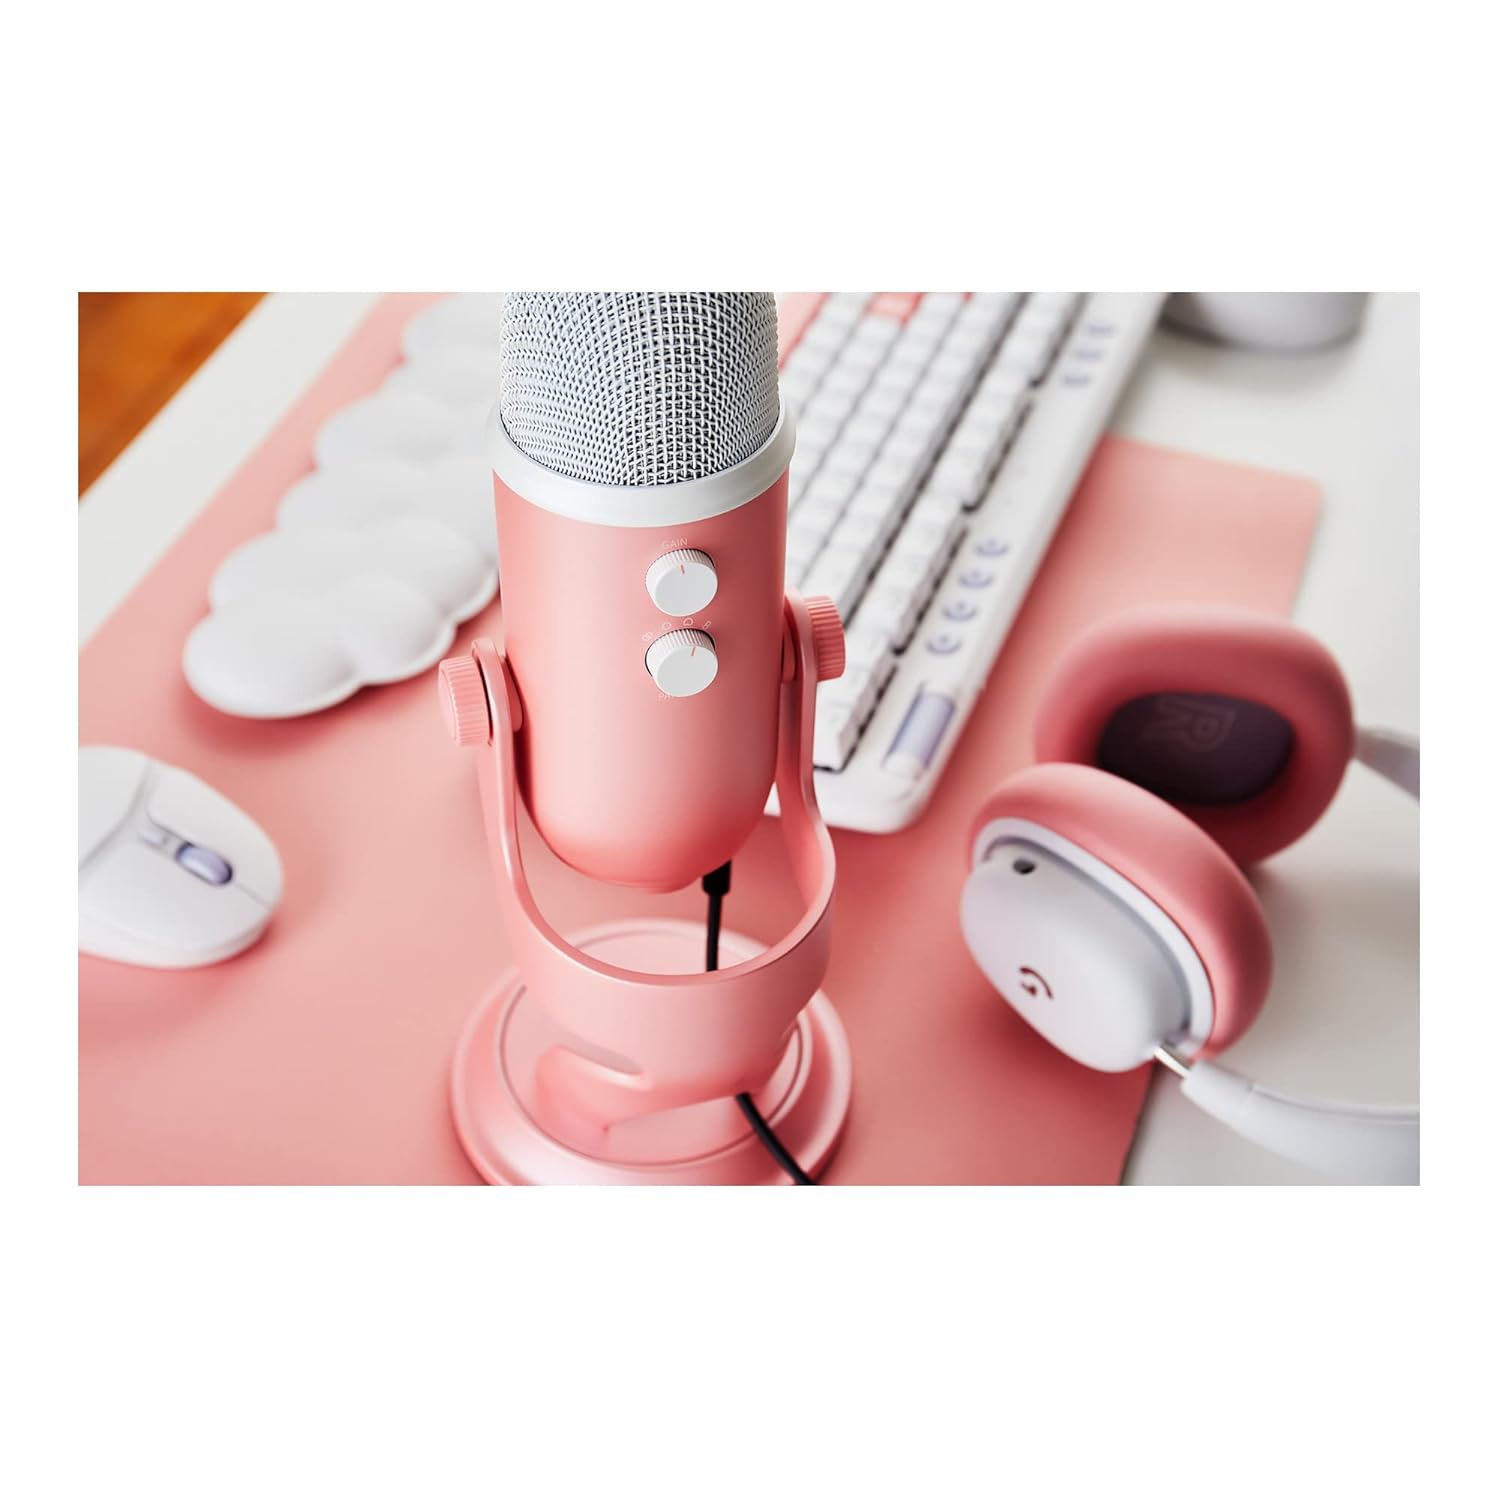 Blue Microphones Yeti USB Microphone Aurora Collection (Pink Dawn) Bundle with Boom Arm Microphone Stand, Monitor Headphones and Pop Filter (4 Items)